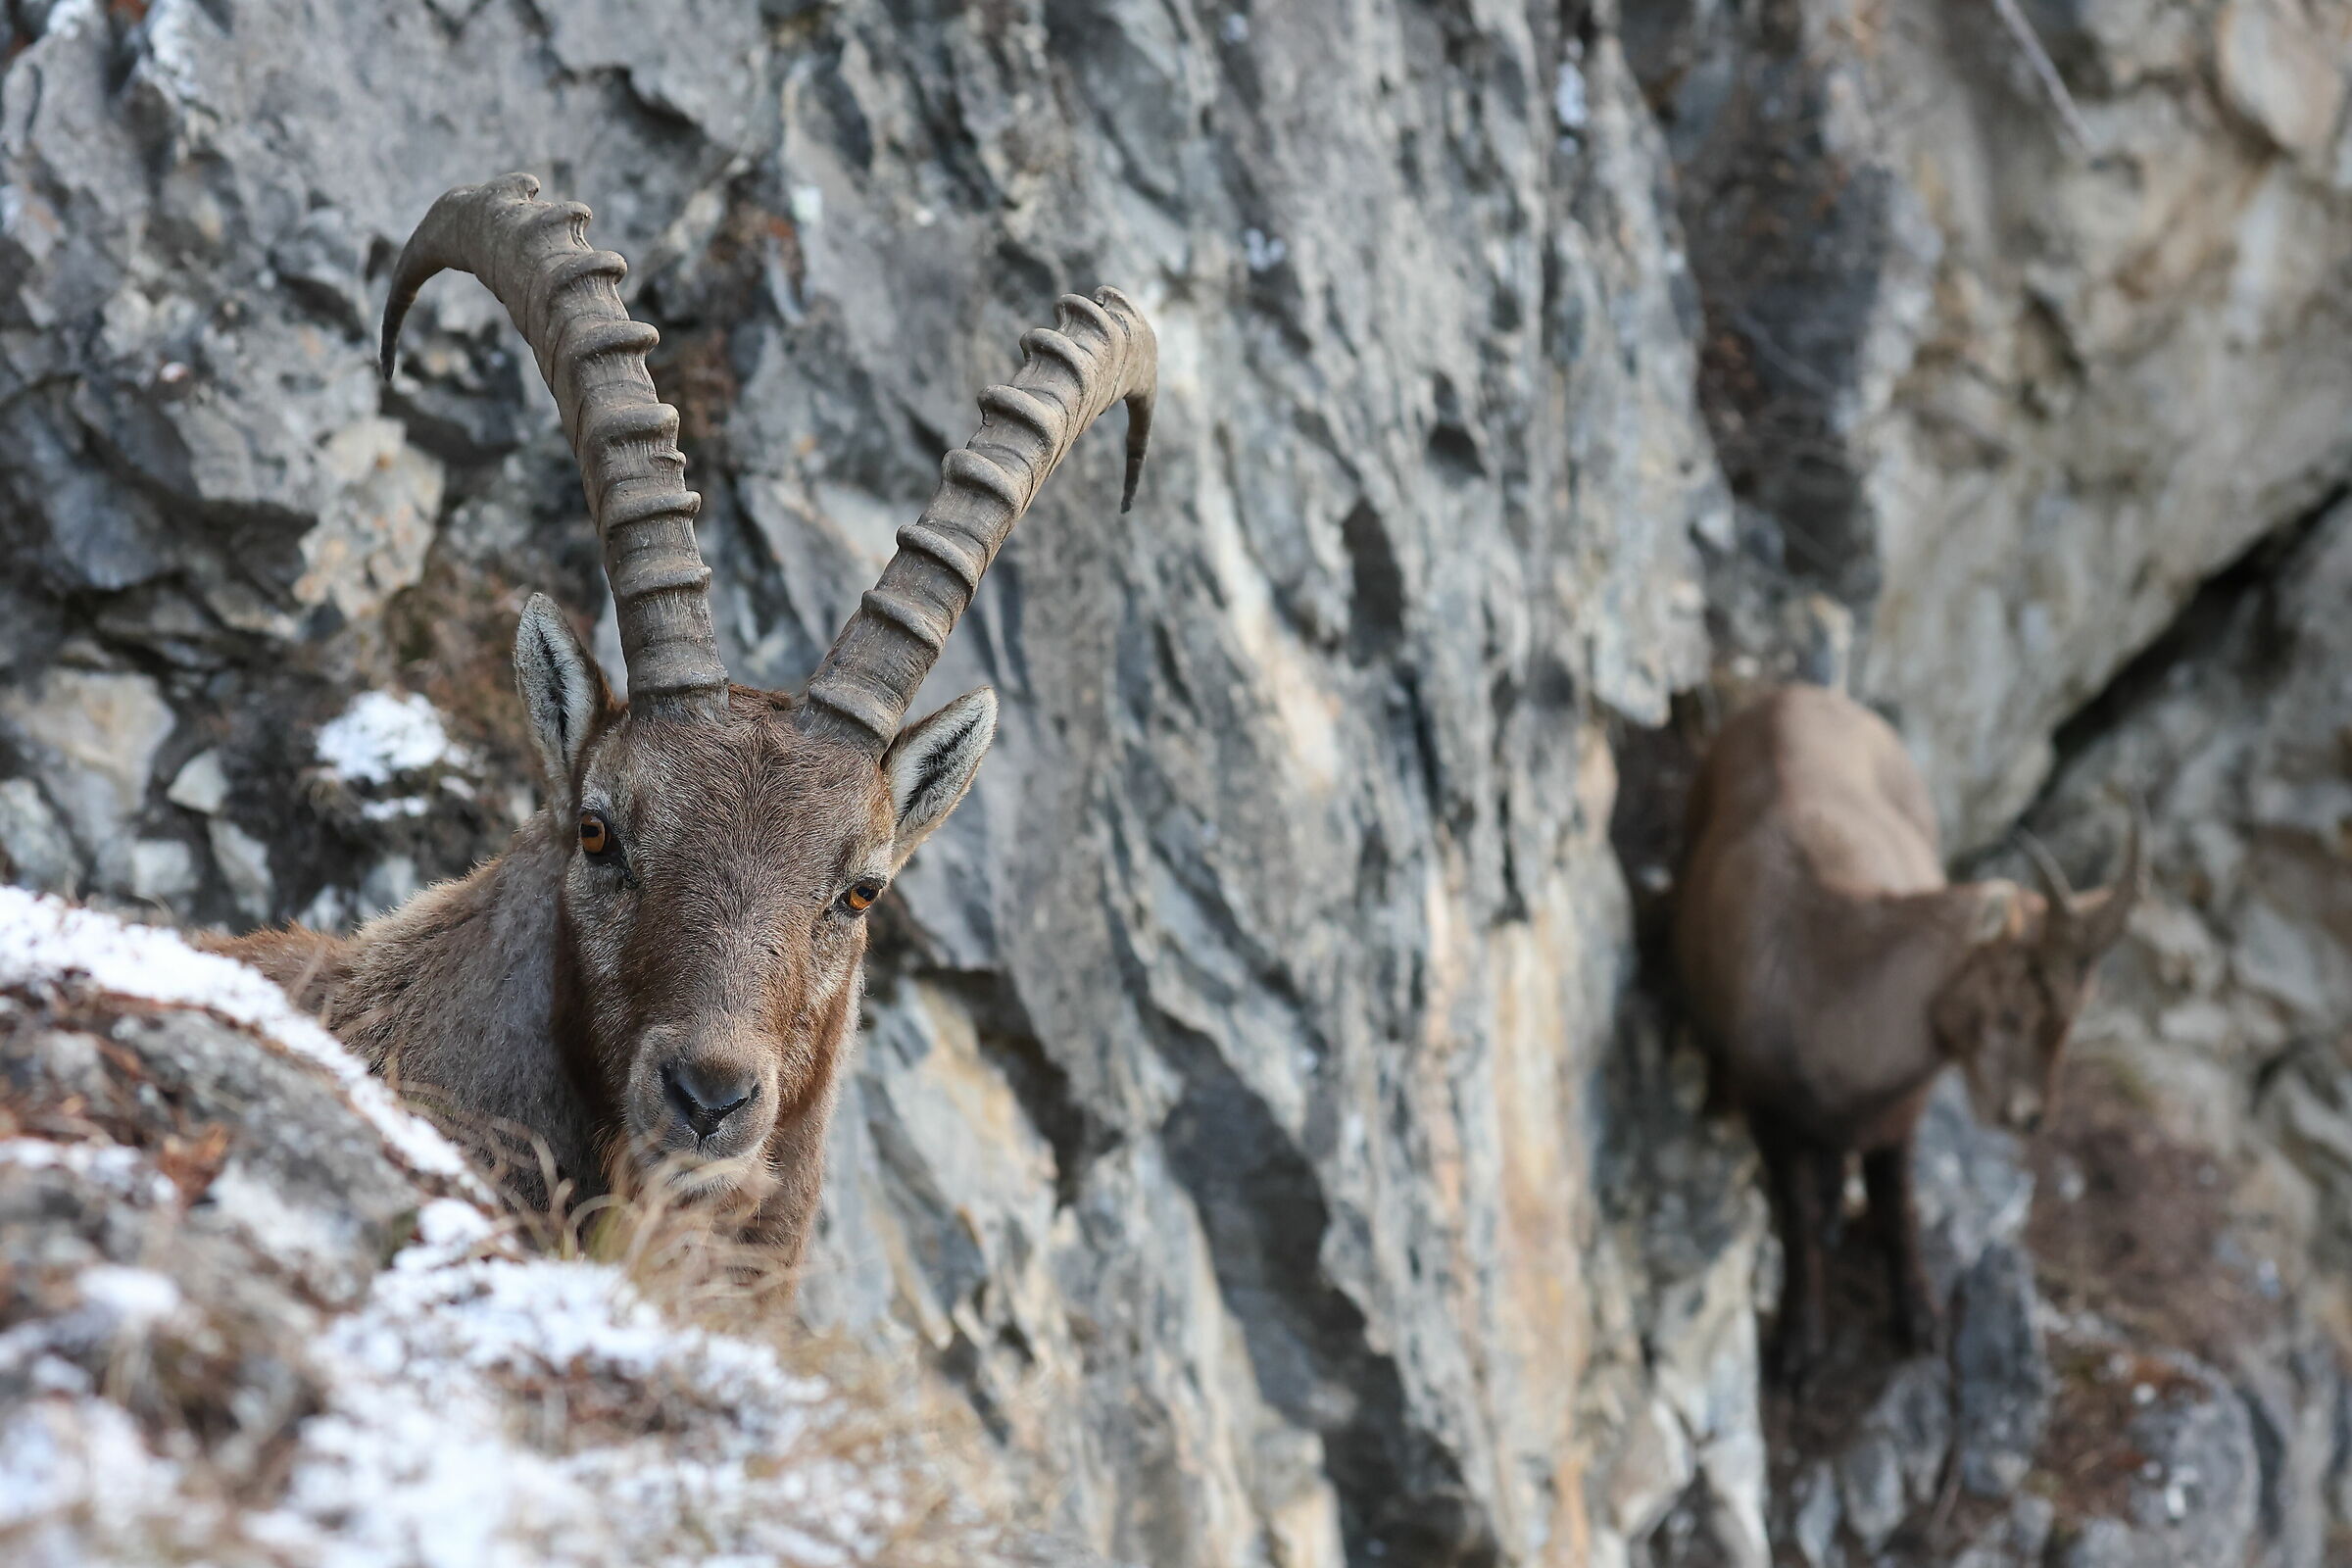 On the edge of the cliff with the ibex...